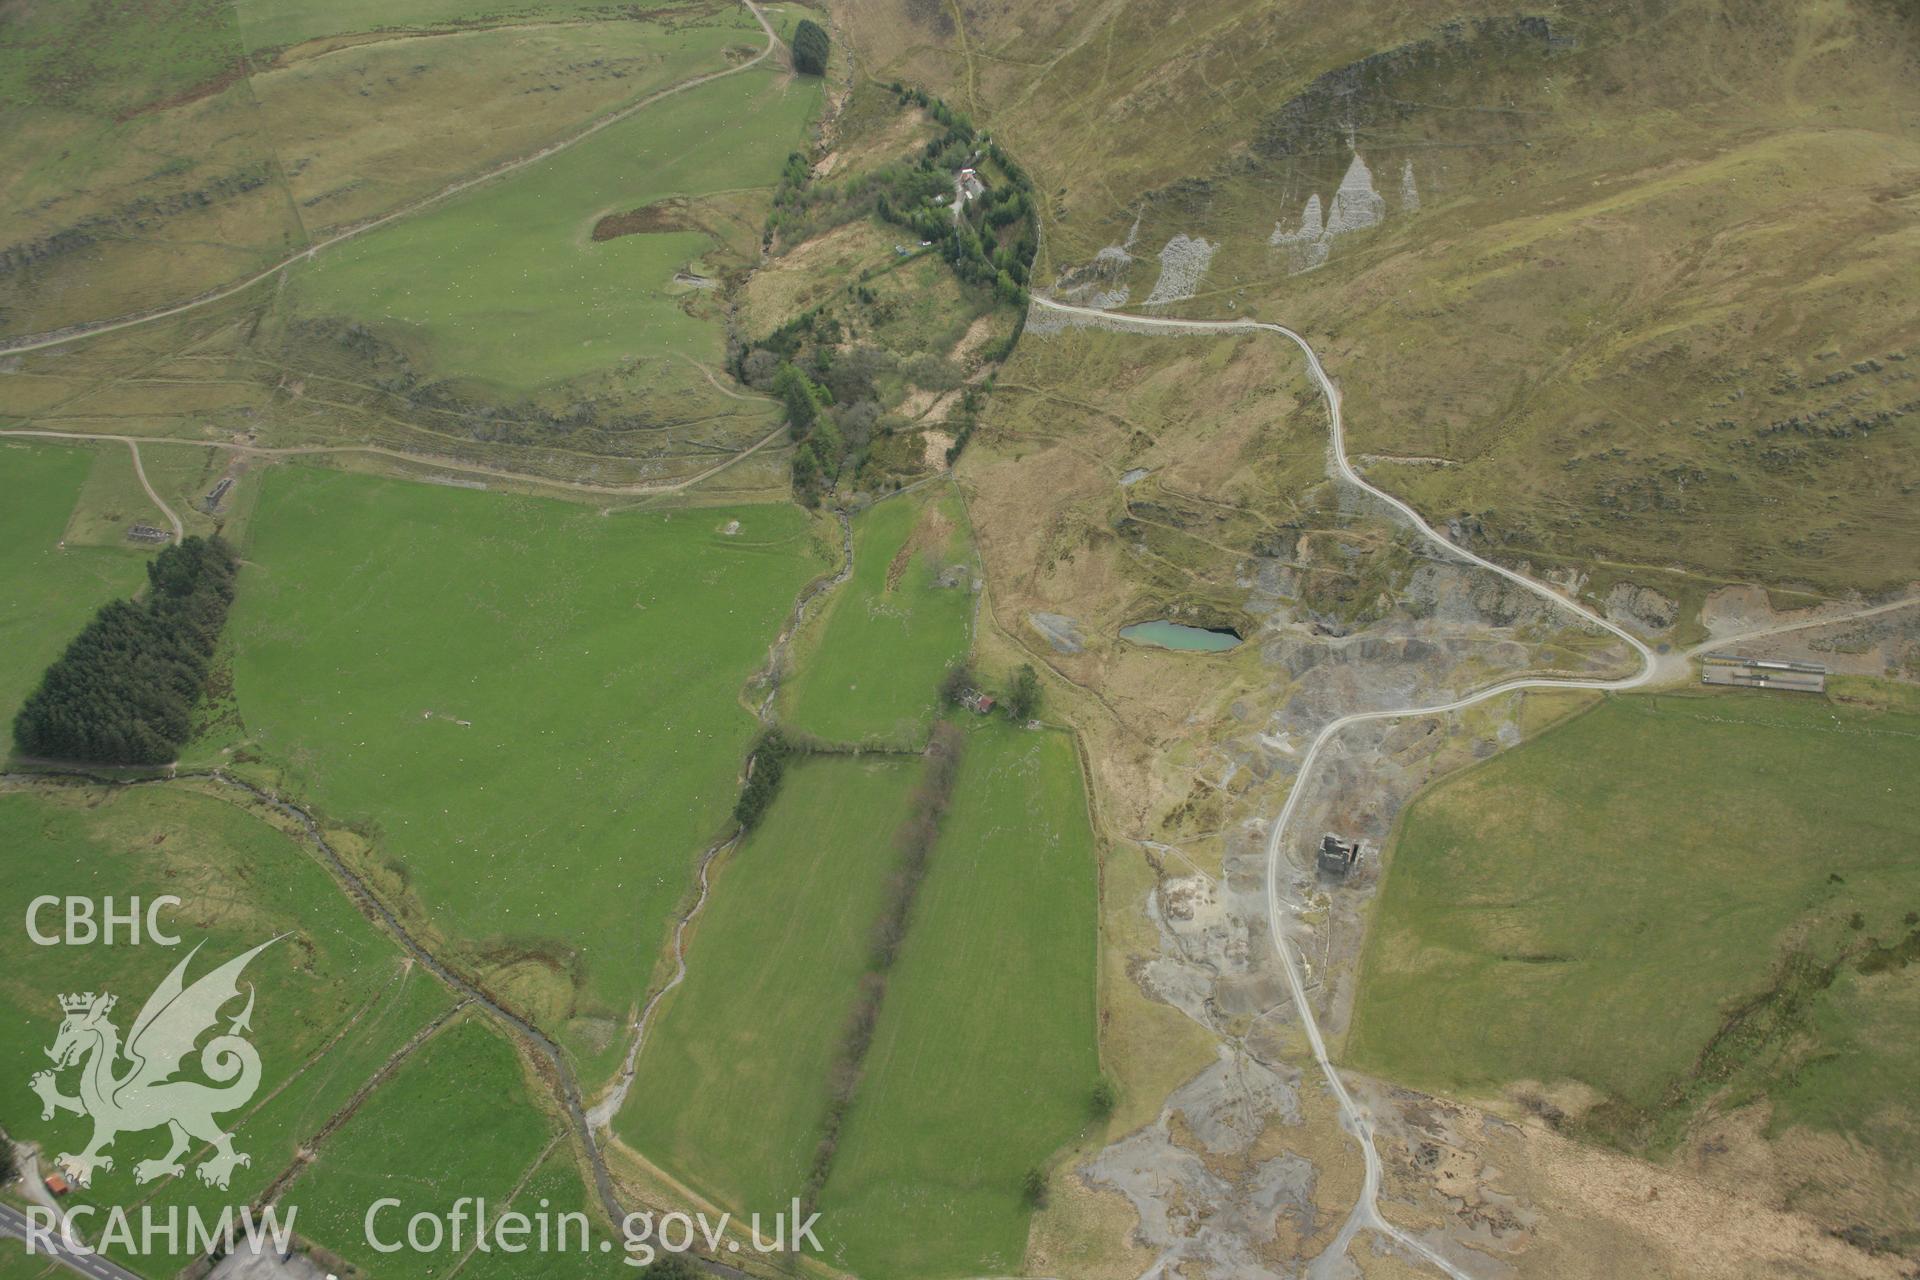 RCAHMW colour oblique aerial photograph of Castell Mine. Taken on 17 April 2007 by Toby Driver